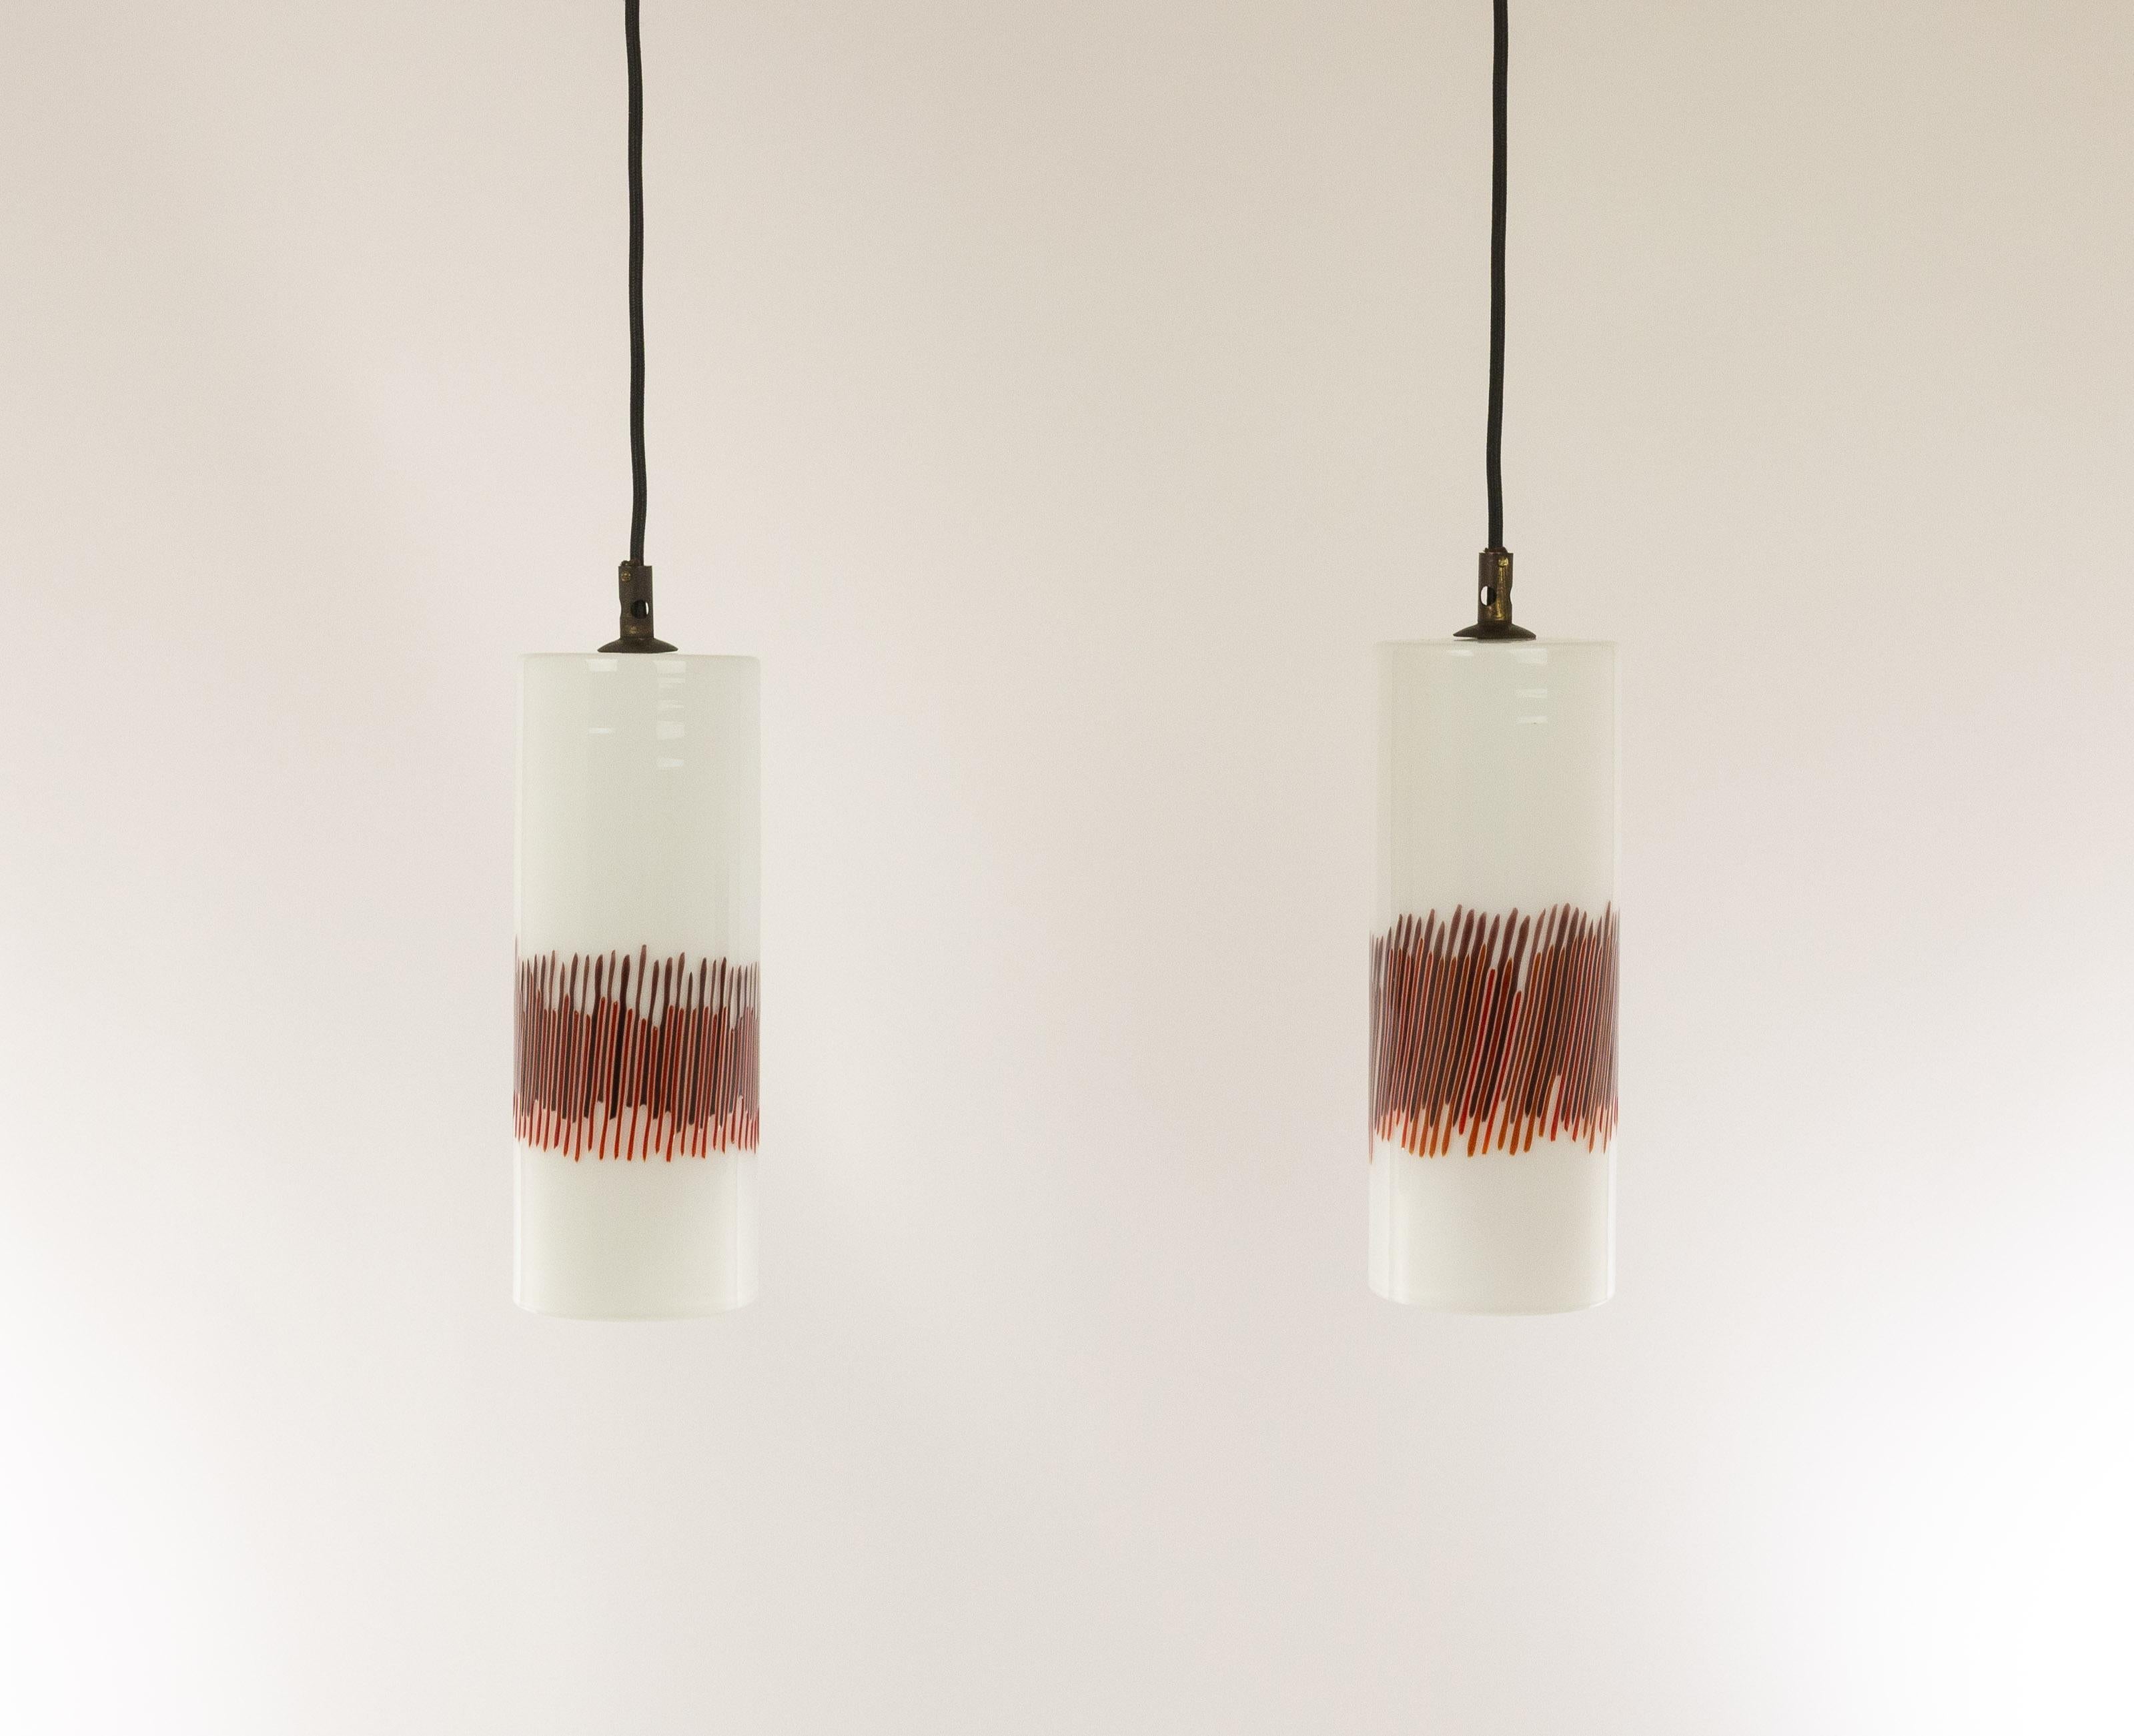 A pair of hand blown white and red striped glass pendants designed by Massimo Vignelli at the start of his impressive career in design and executed by Murano glass specialist Venini.